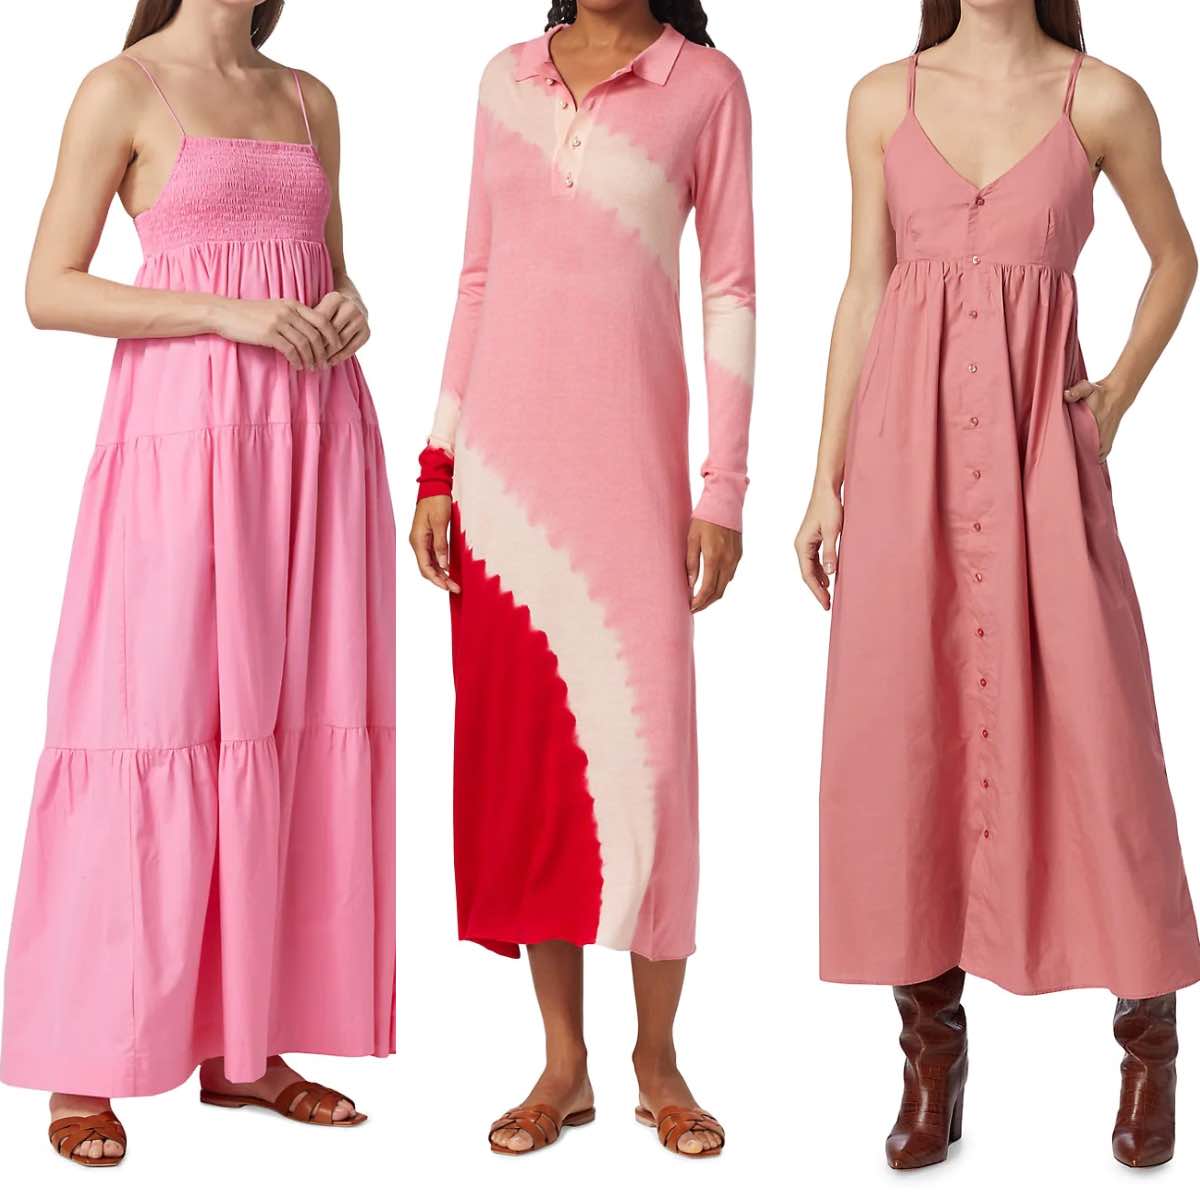 Women wearing pink dresses with brown shoes